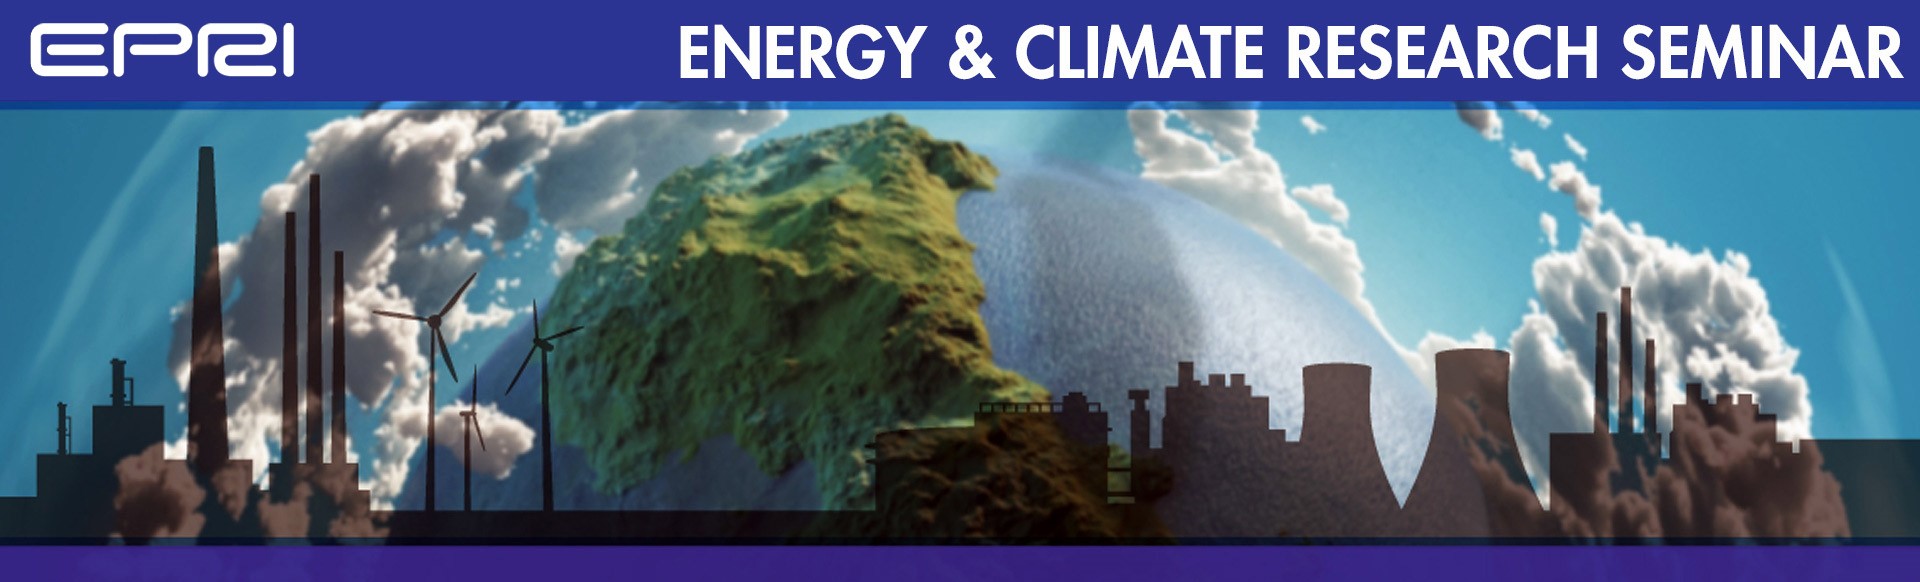 Energy and Climate Seminar Banner